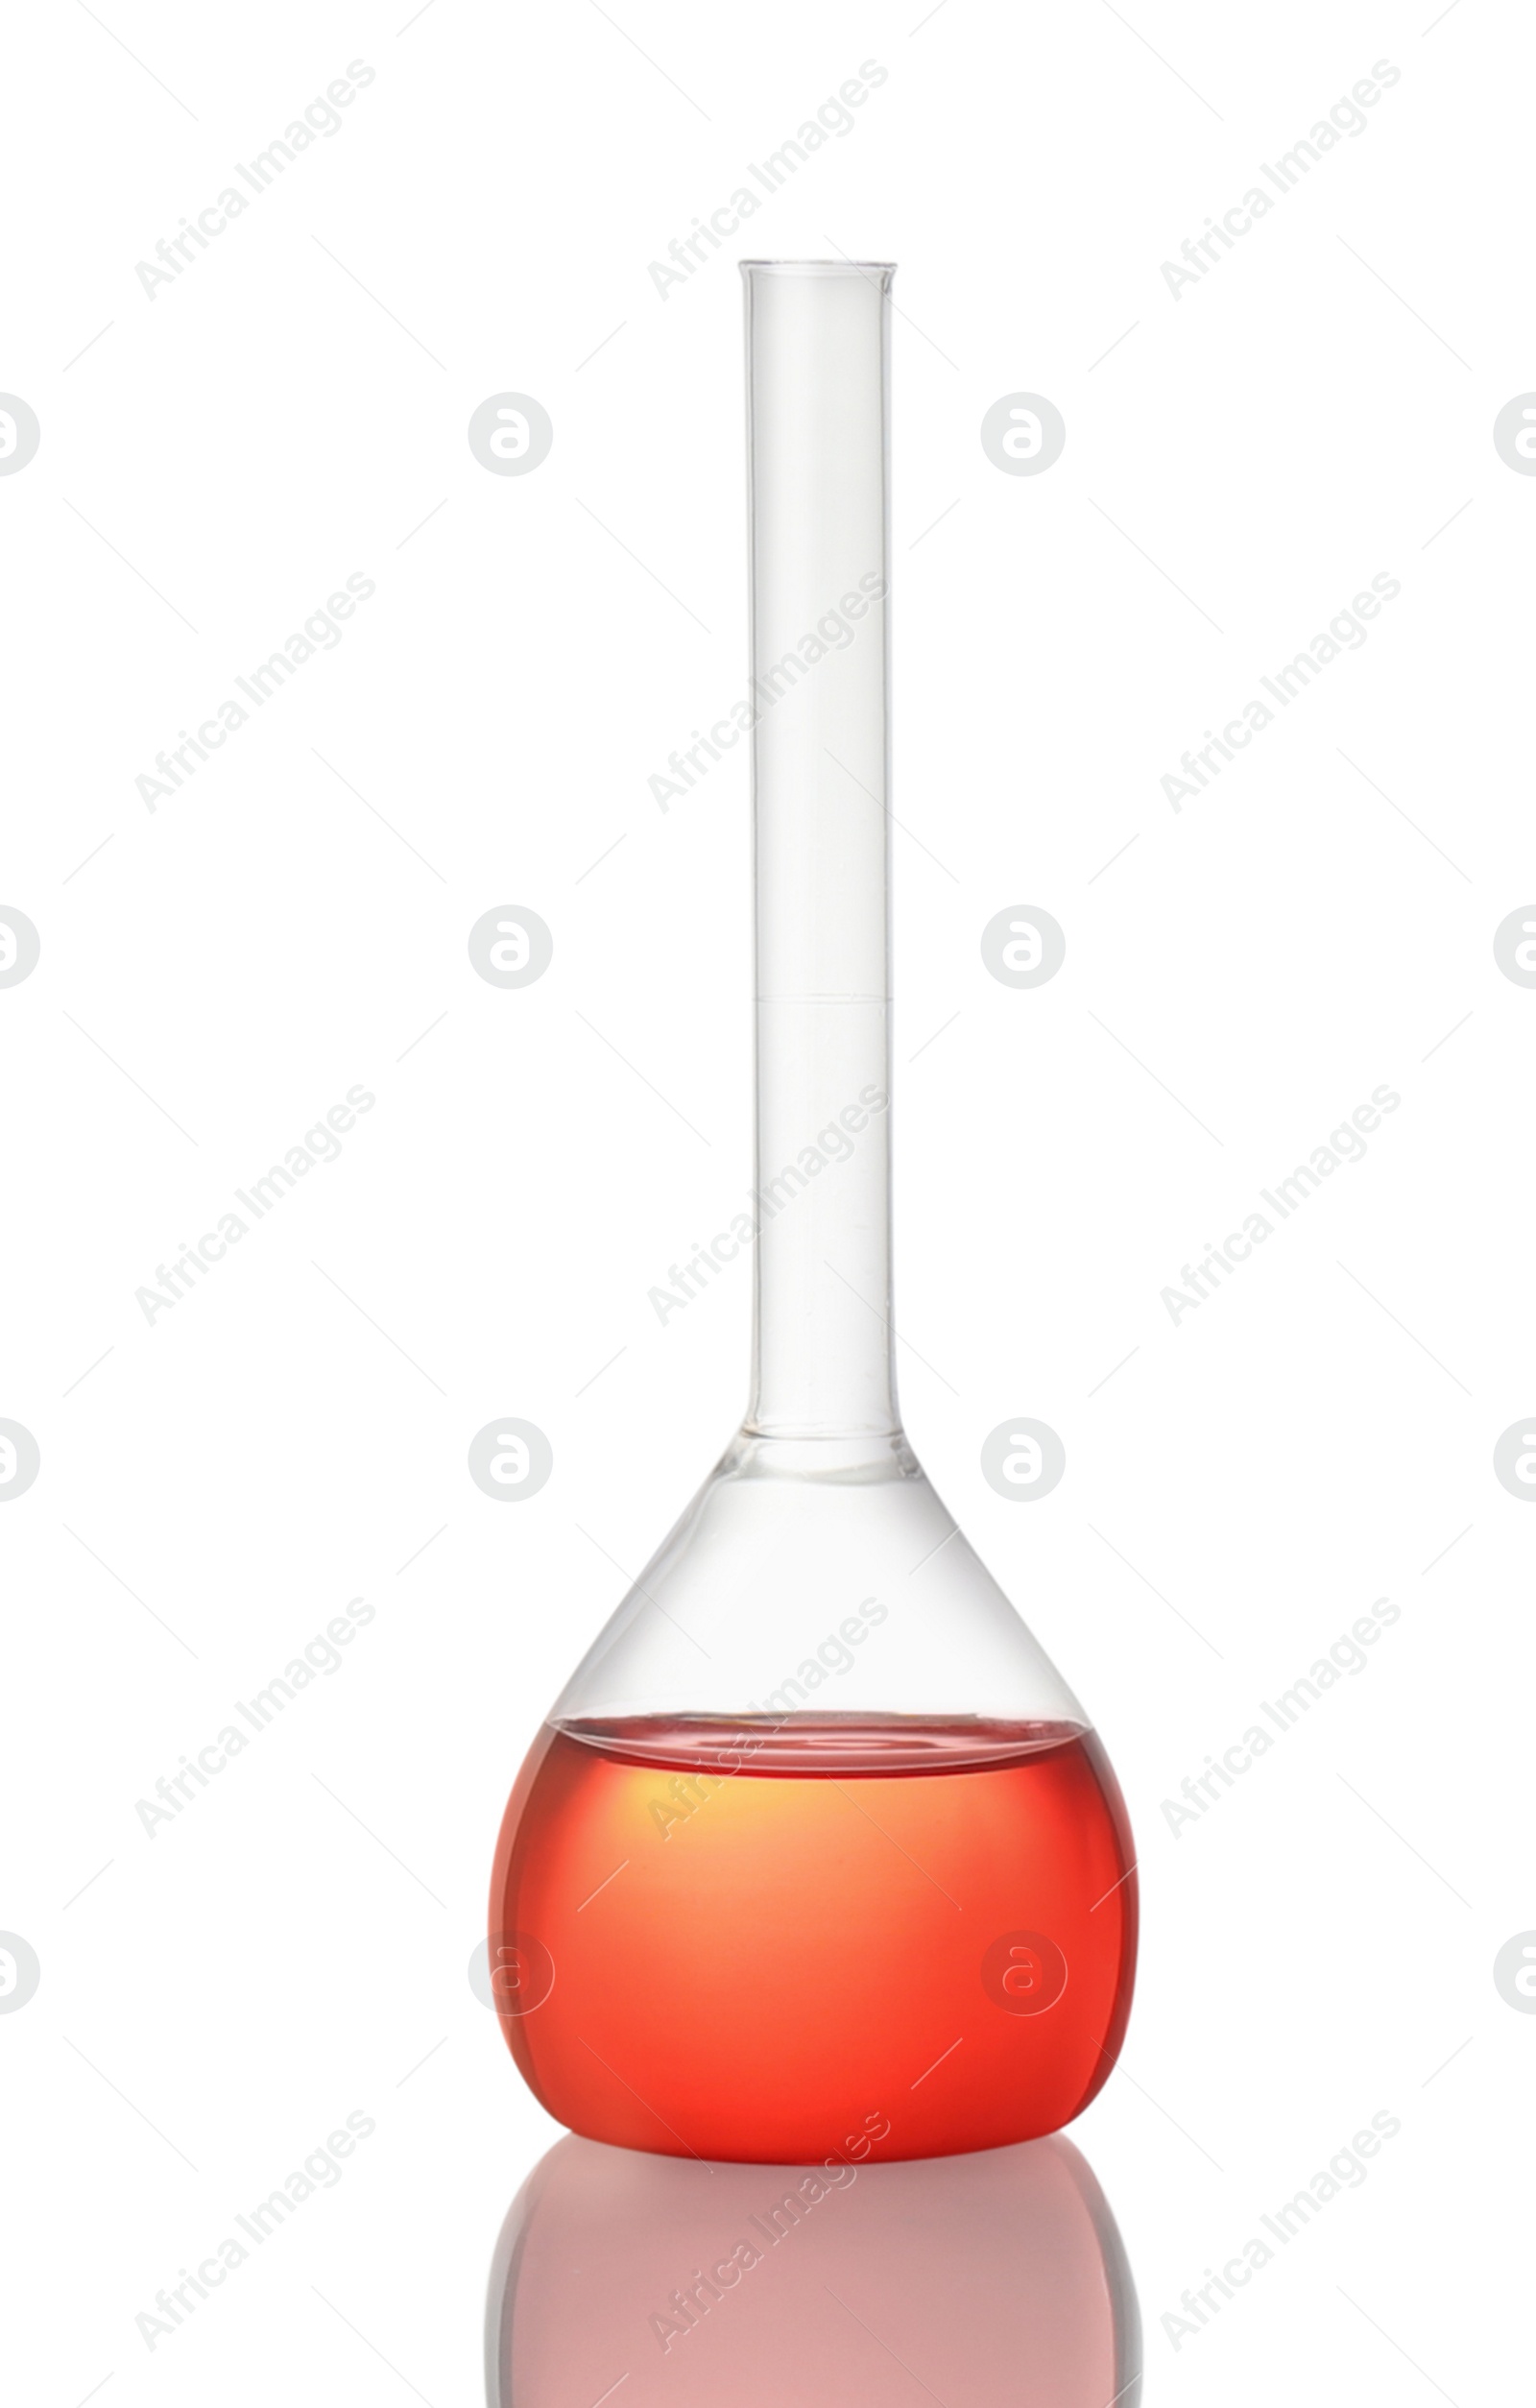 Photo of Volumetric flask with red liquid isolated on white